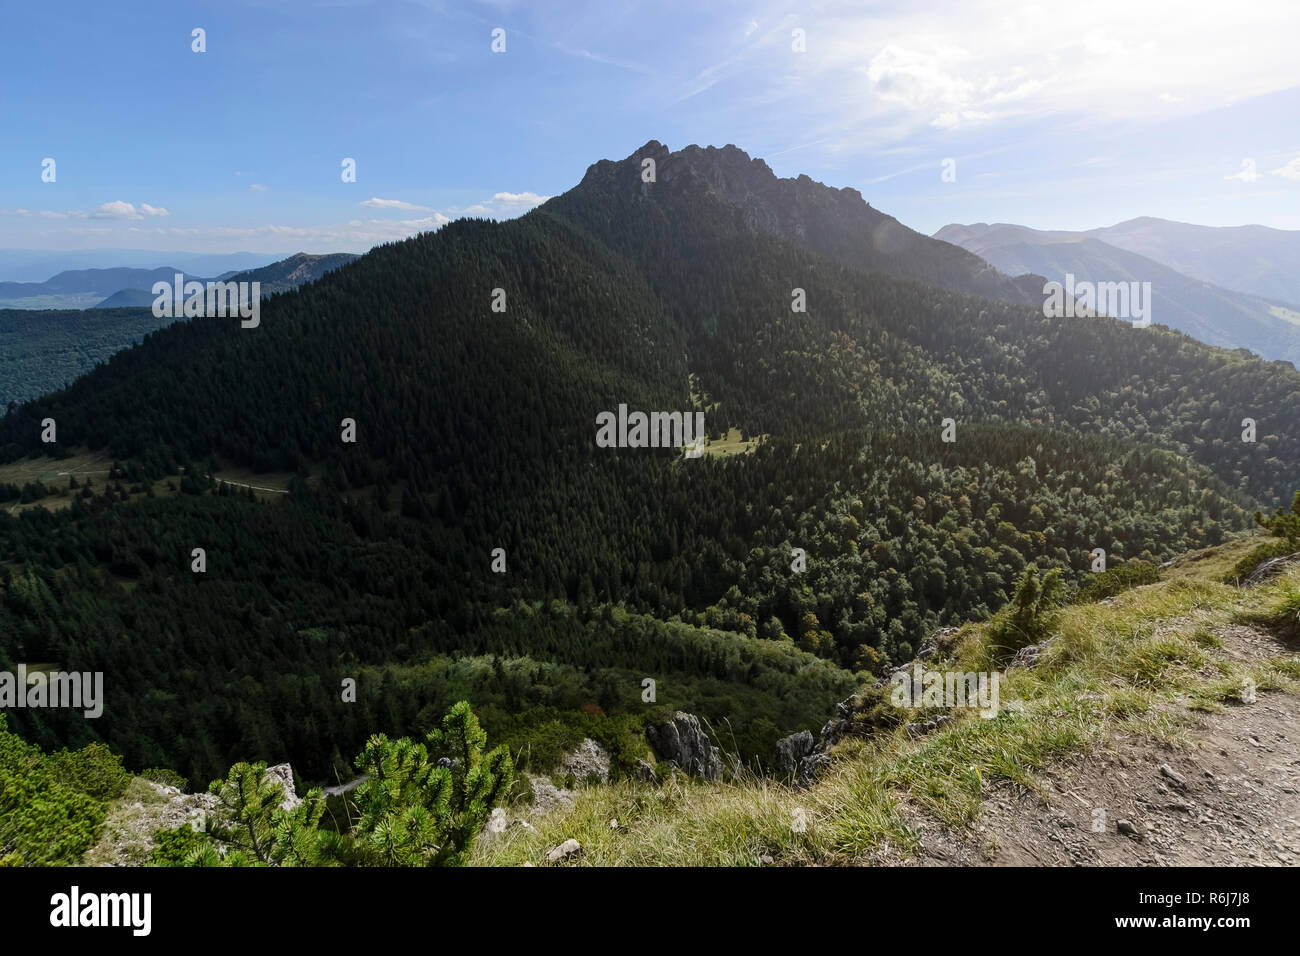 Great (Big) Rozsutec hill, view from the Little Rozsutec hill in sunny day, Slovakia. Stock Photo